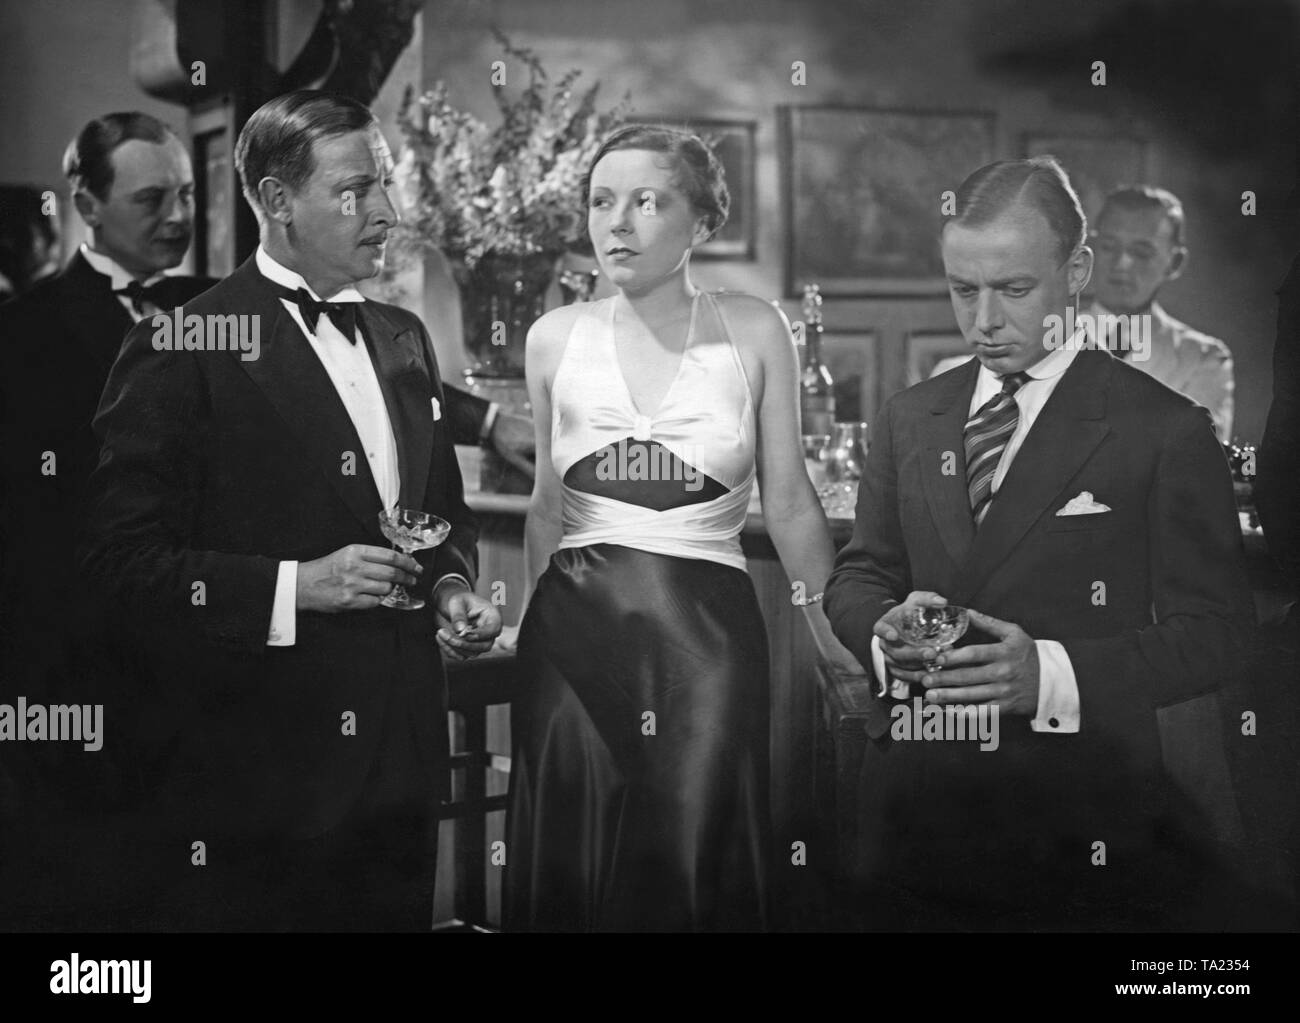 Hans Zesch-Ballot (left), Fritz Odemar as authorized signatory Lissmann, Flockina von Platen as Gina Stern and Heinz Ruehmann as racing cyclist Willy Streblow (right) in the film comedy 'Stroke by the Bill' (German: Strich durch die Rechnung) by Alfred Zeisler. The plot of the film is based on the novel by Fred Antoine Angermayer. Stock Photo